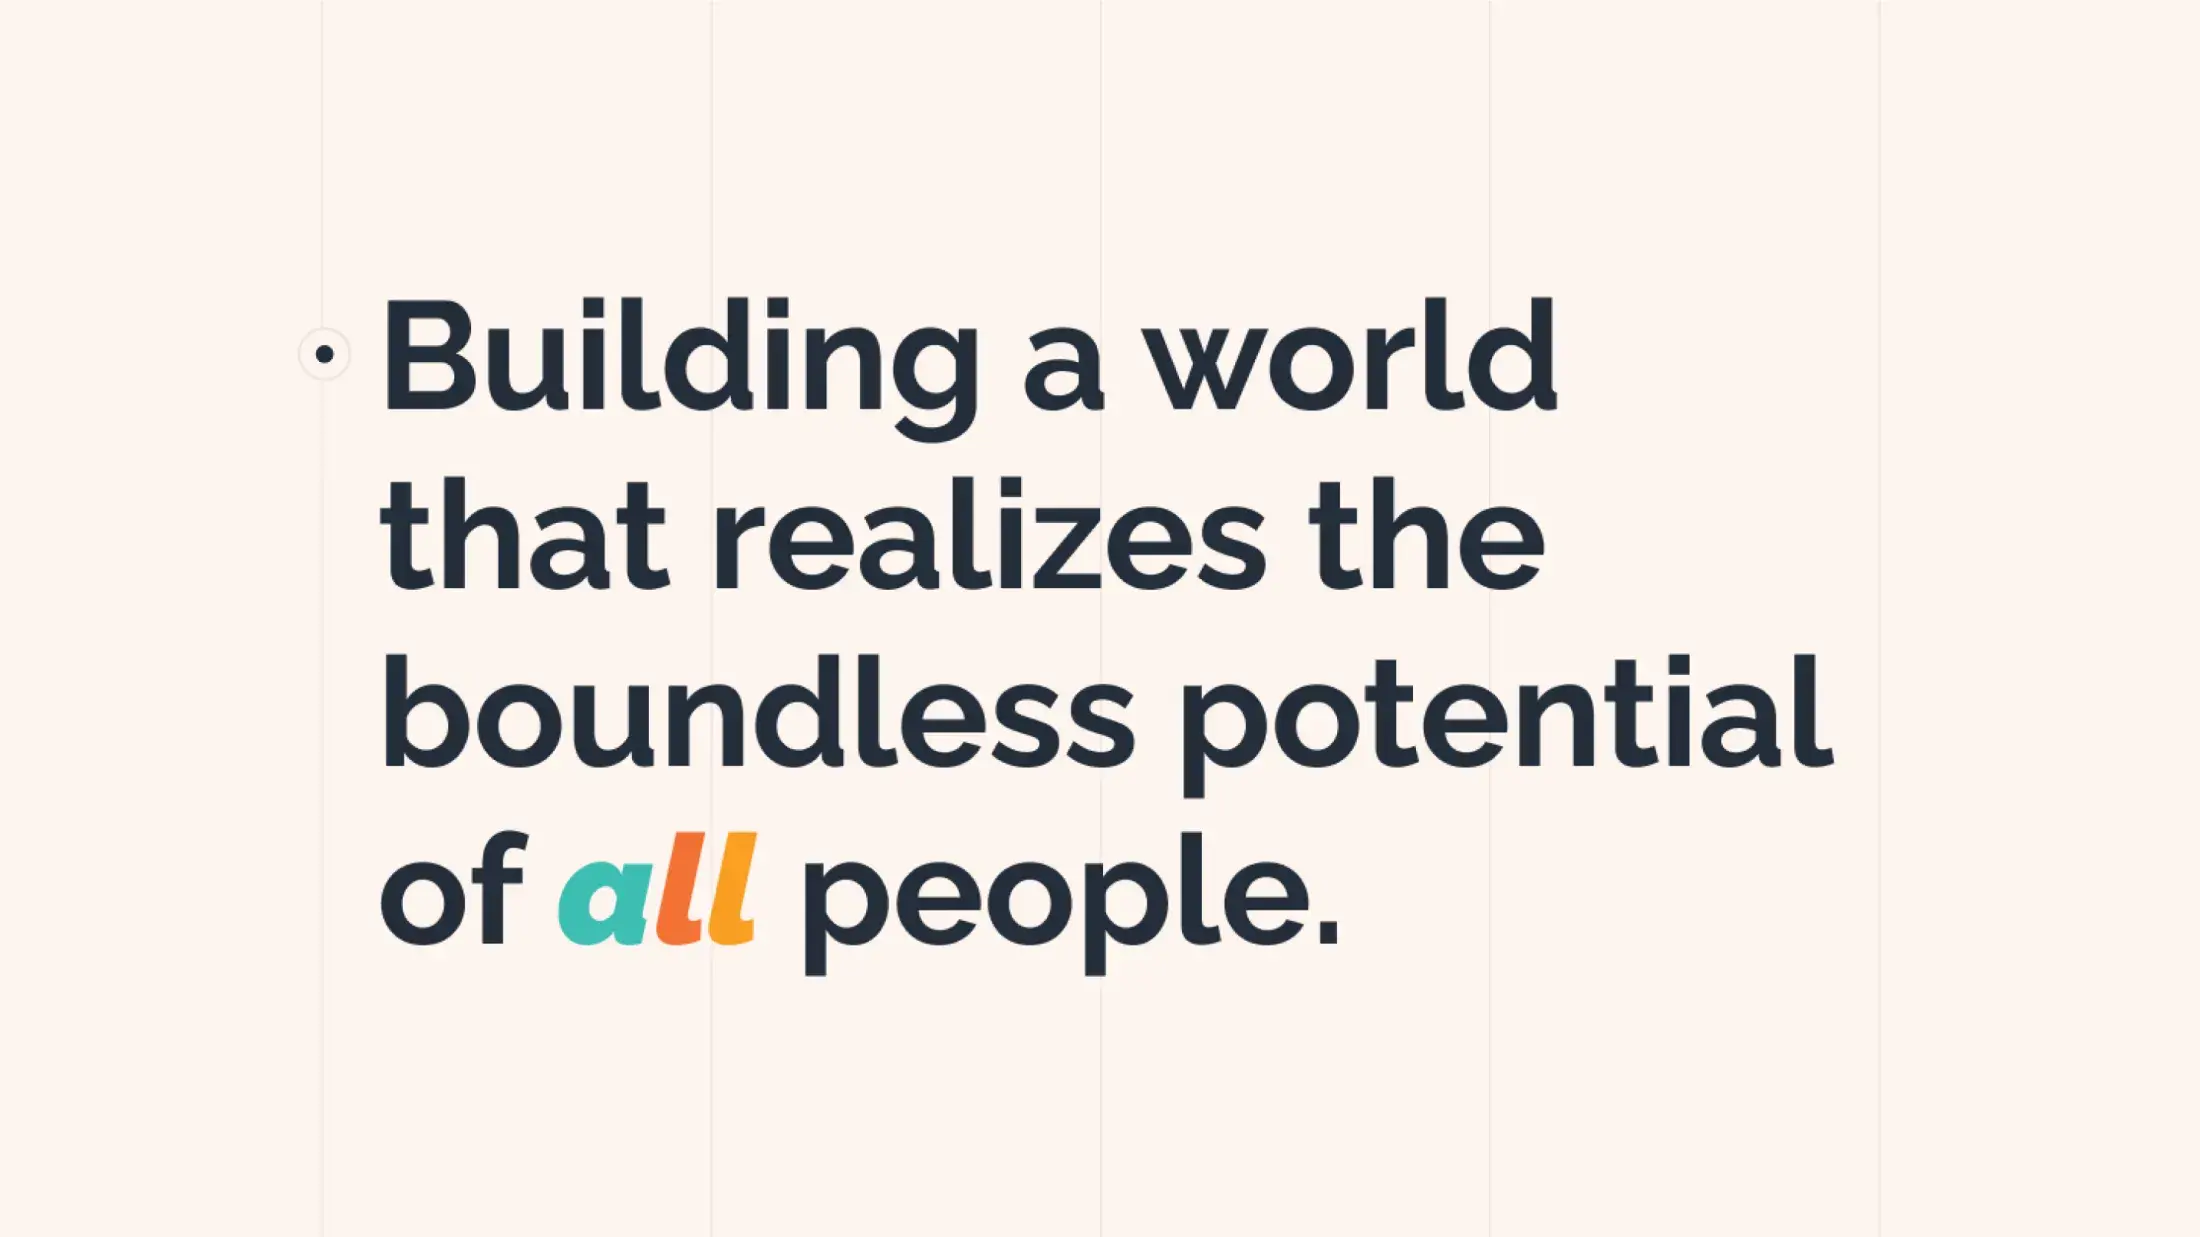 Stylized mission statement statement, "Building a world that realizes the boundless potential of all people"